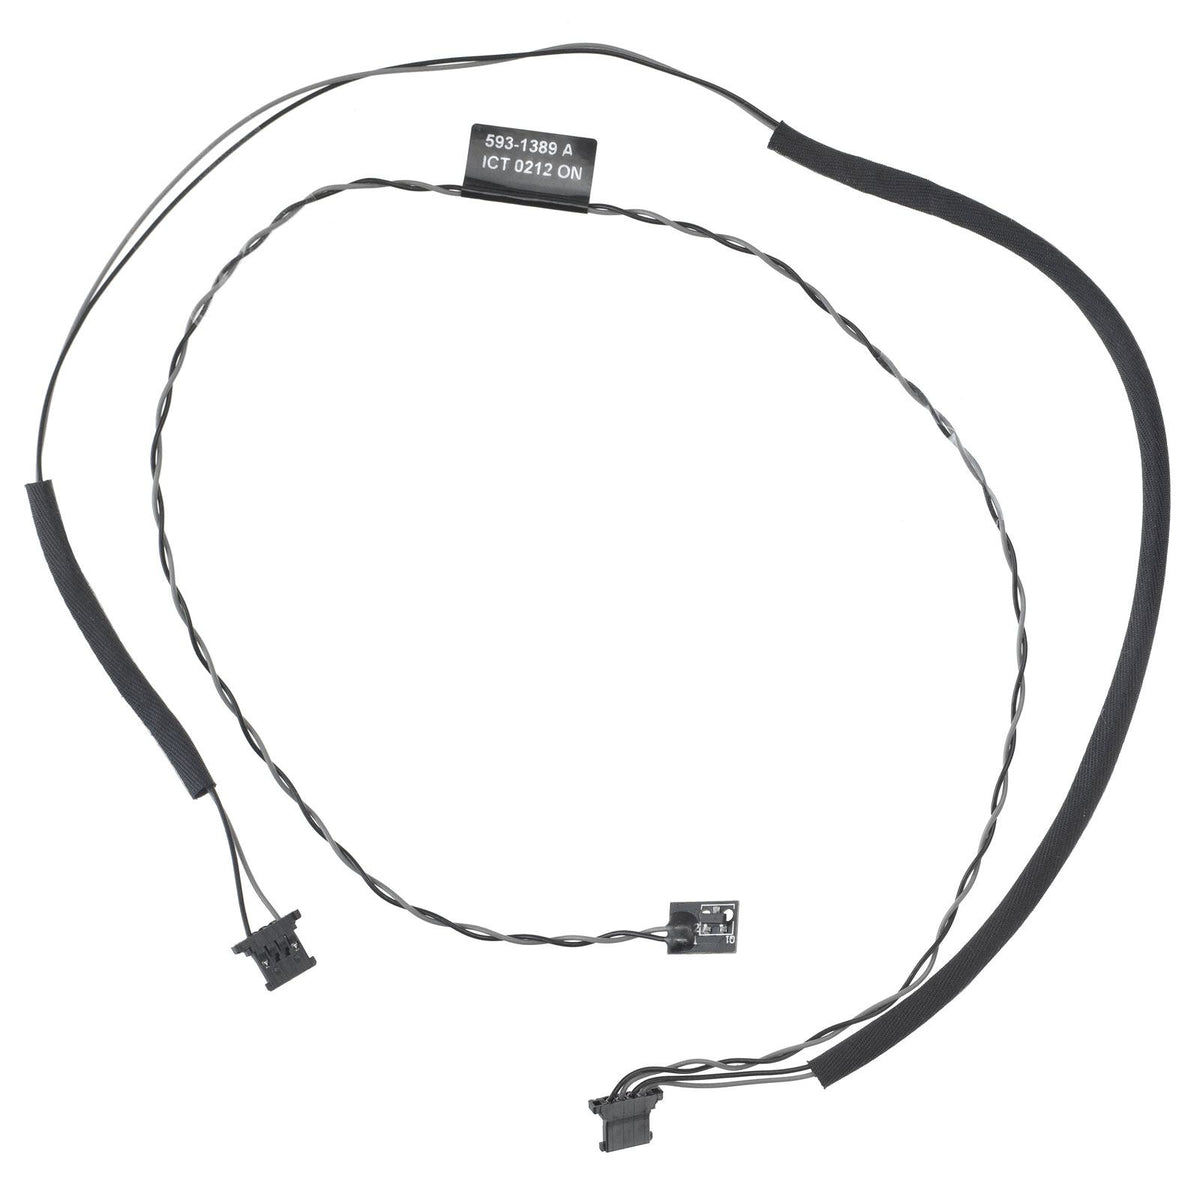 LVDS V-SYNC TEMPERATURE CABLE FOR IMAC 21.5" A1311 (MID 2011 - LATE 2011)